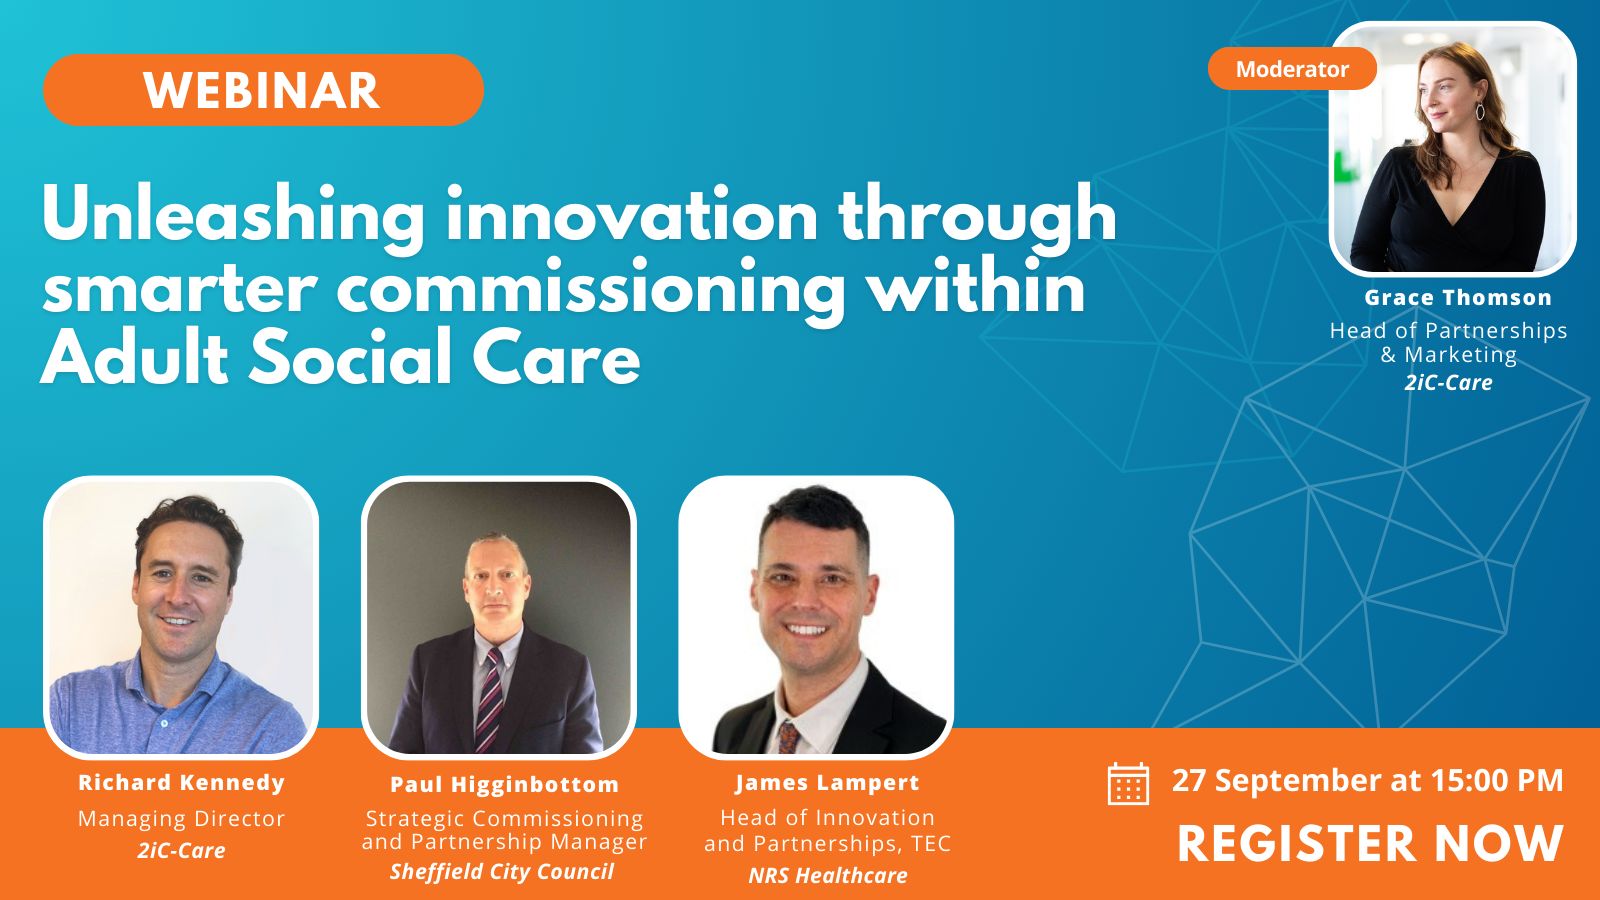 Webinar on demand - Unleashing innovation through smarter commissioning within Adult Social Care